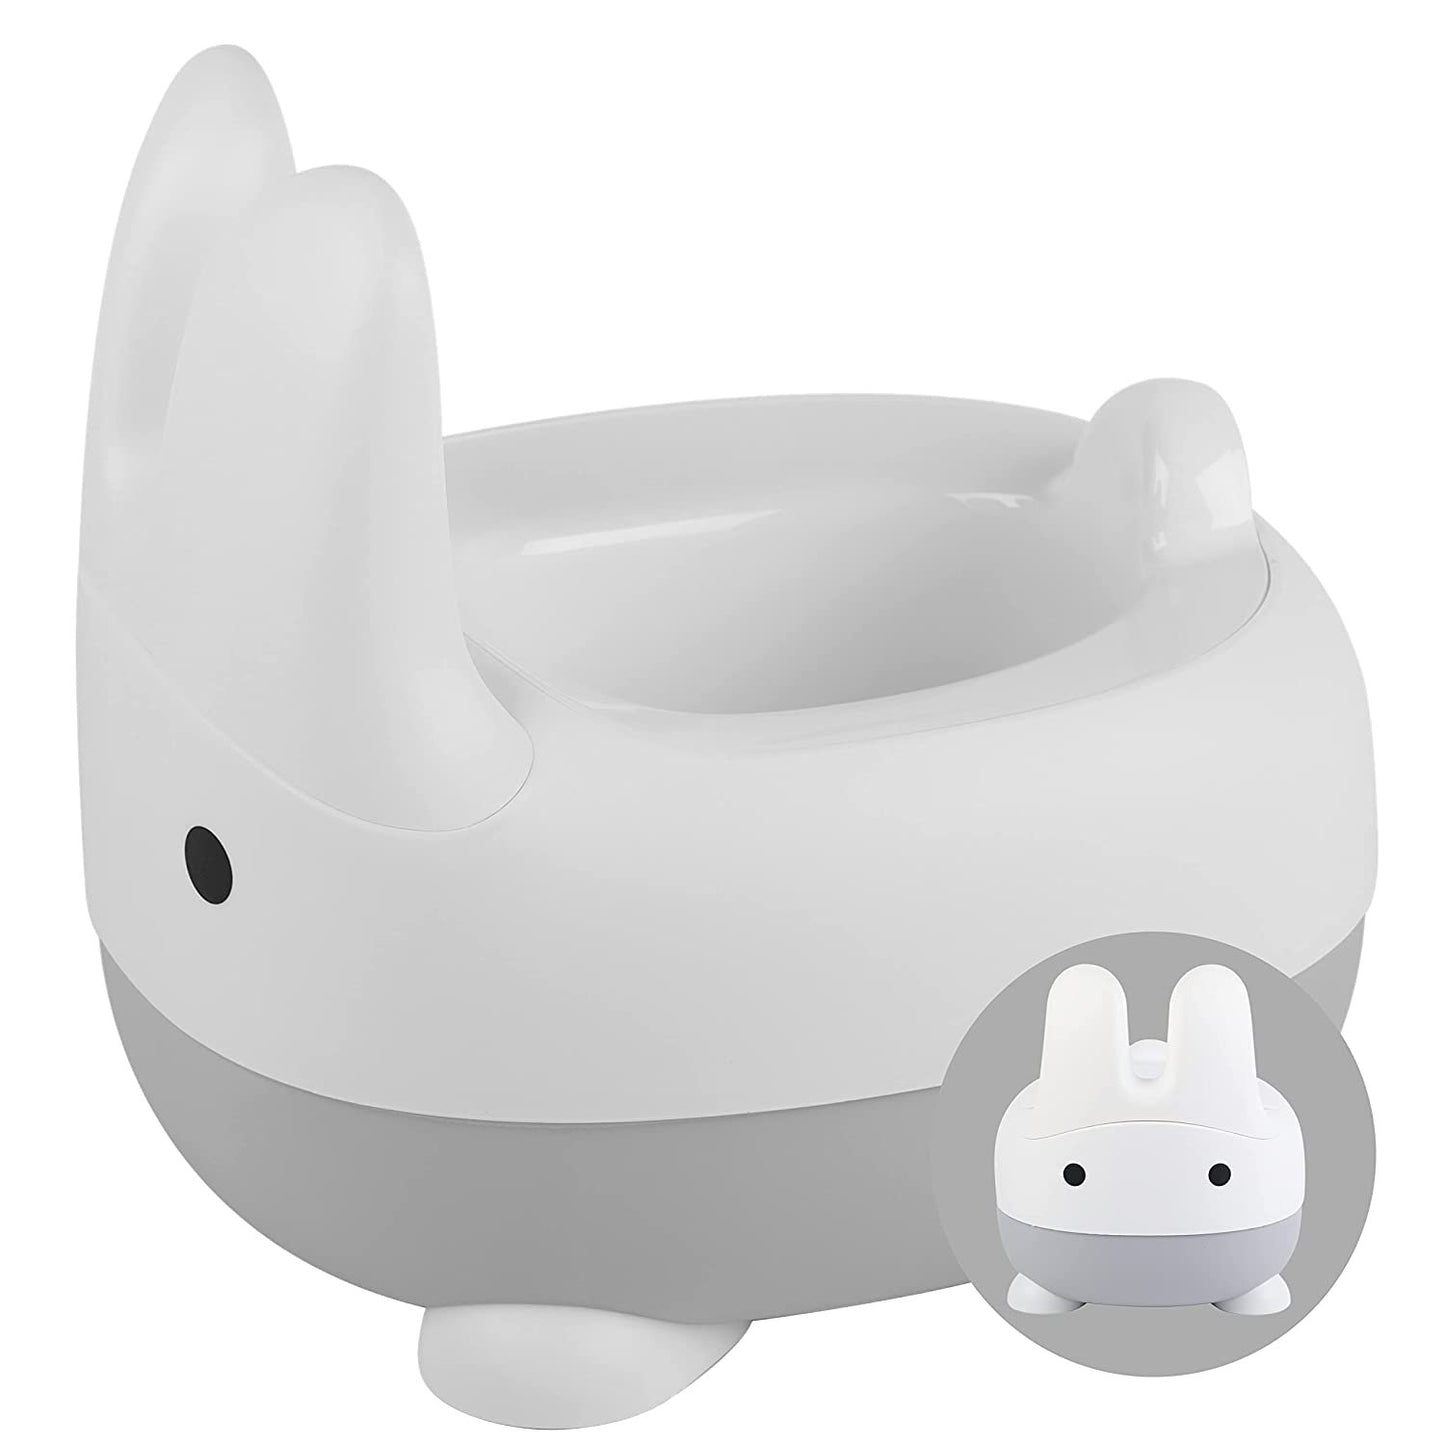 ToeZee Bunny Toddler Potty Training Toilet Seat - Comfortable Toddler Toilet Seat - Easy to Clean Removable Bowl - Non-Slip Kids Potty Chair - Toddler Potty Seat for Boys & Girls (Gray)